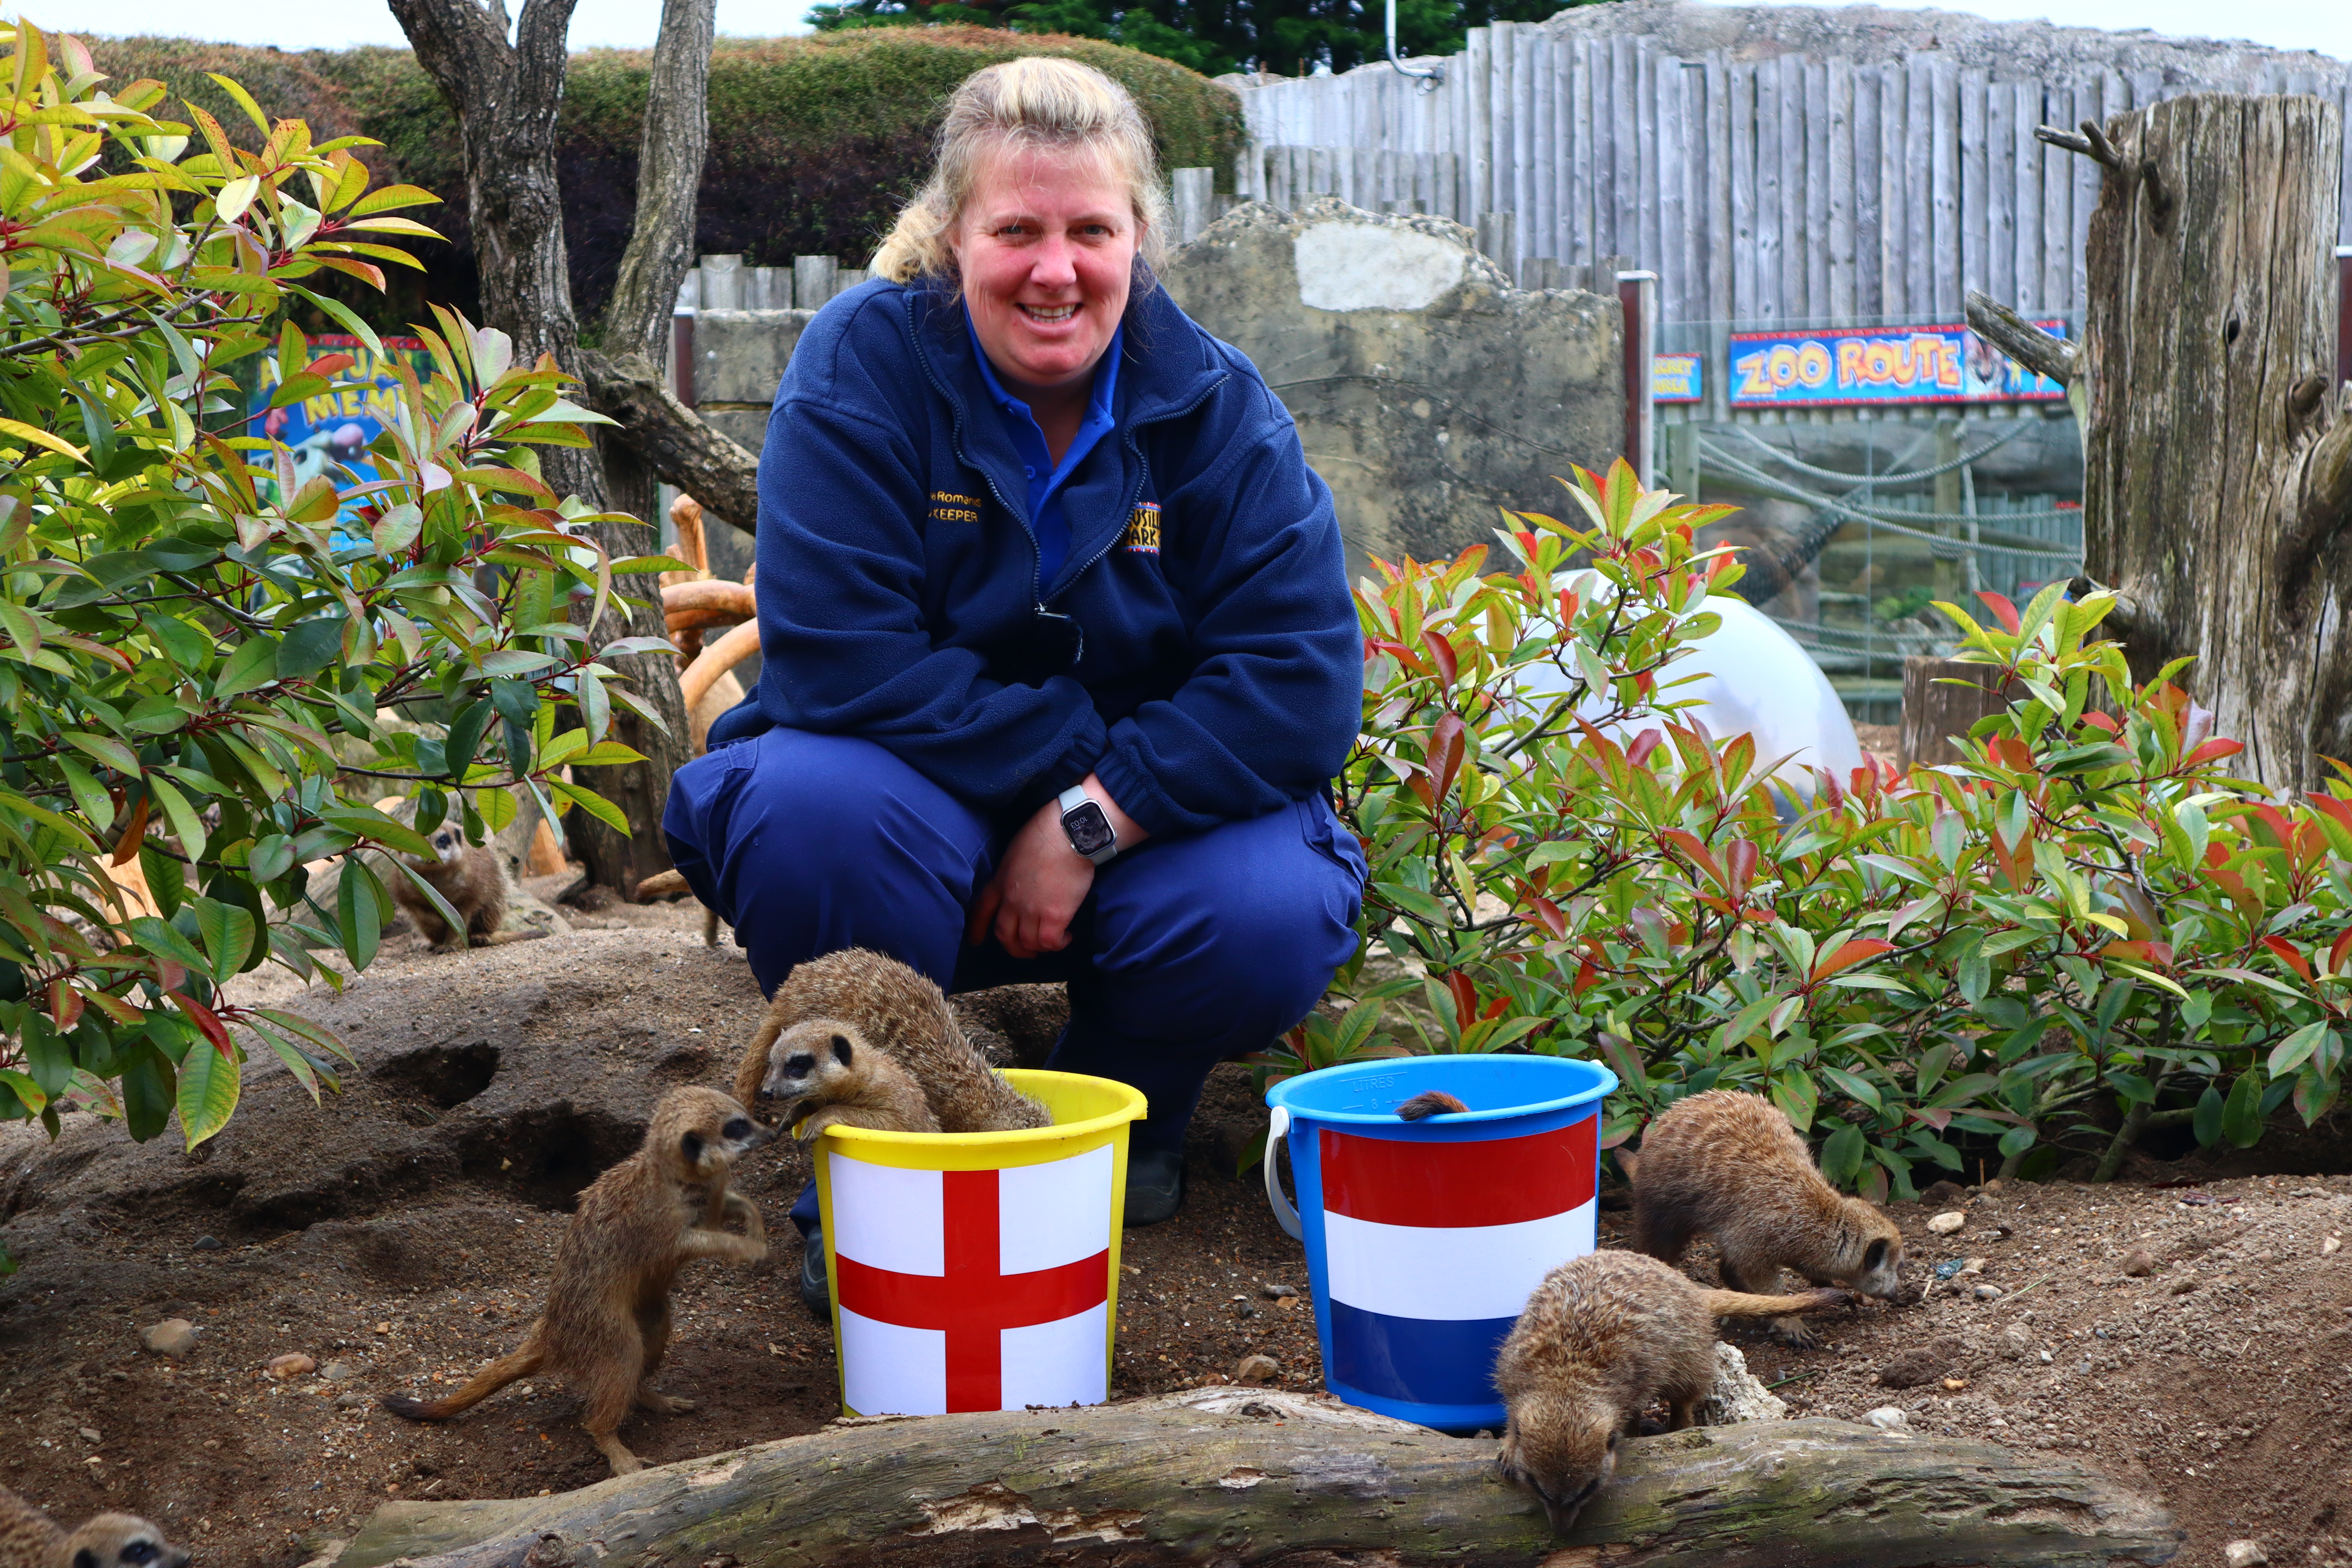 Drusillas head keeper Gemma Romanis crouching in front of the two buckets with the meerkats